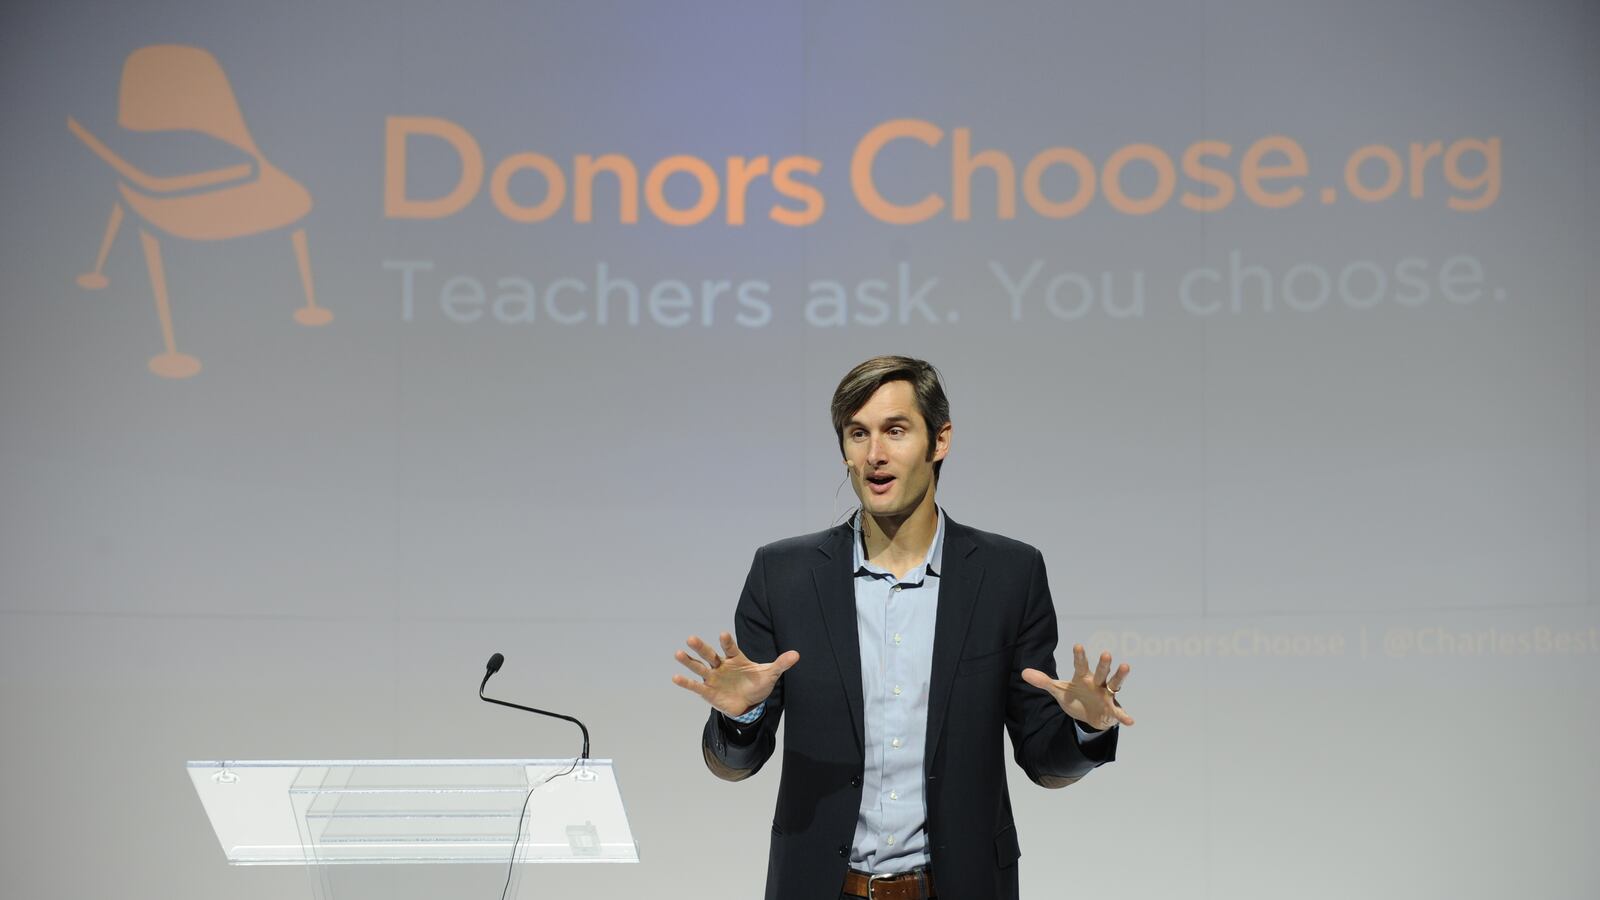 Charles Best is the founder and CEO of DonorsChoose, a crowdfunding website through which anyone in the world can donate money to any public school teacher in the country.